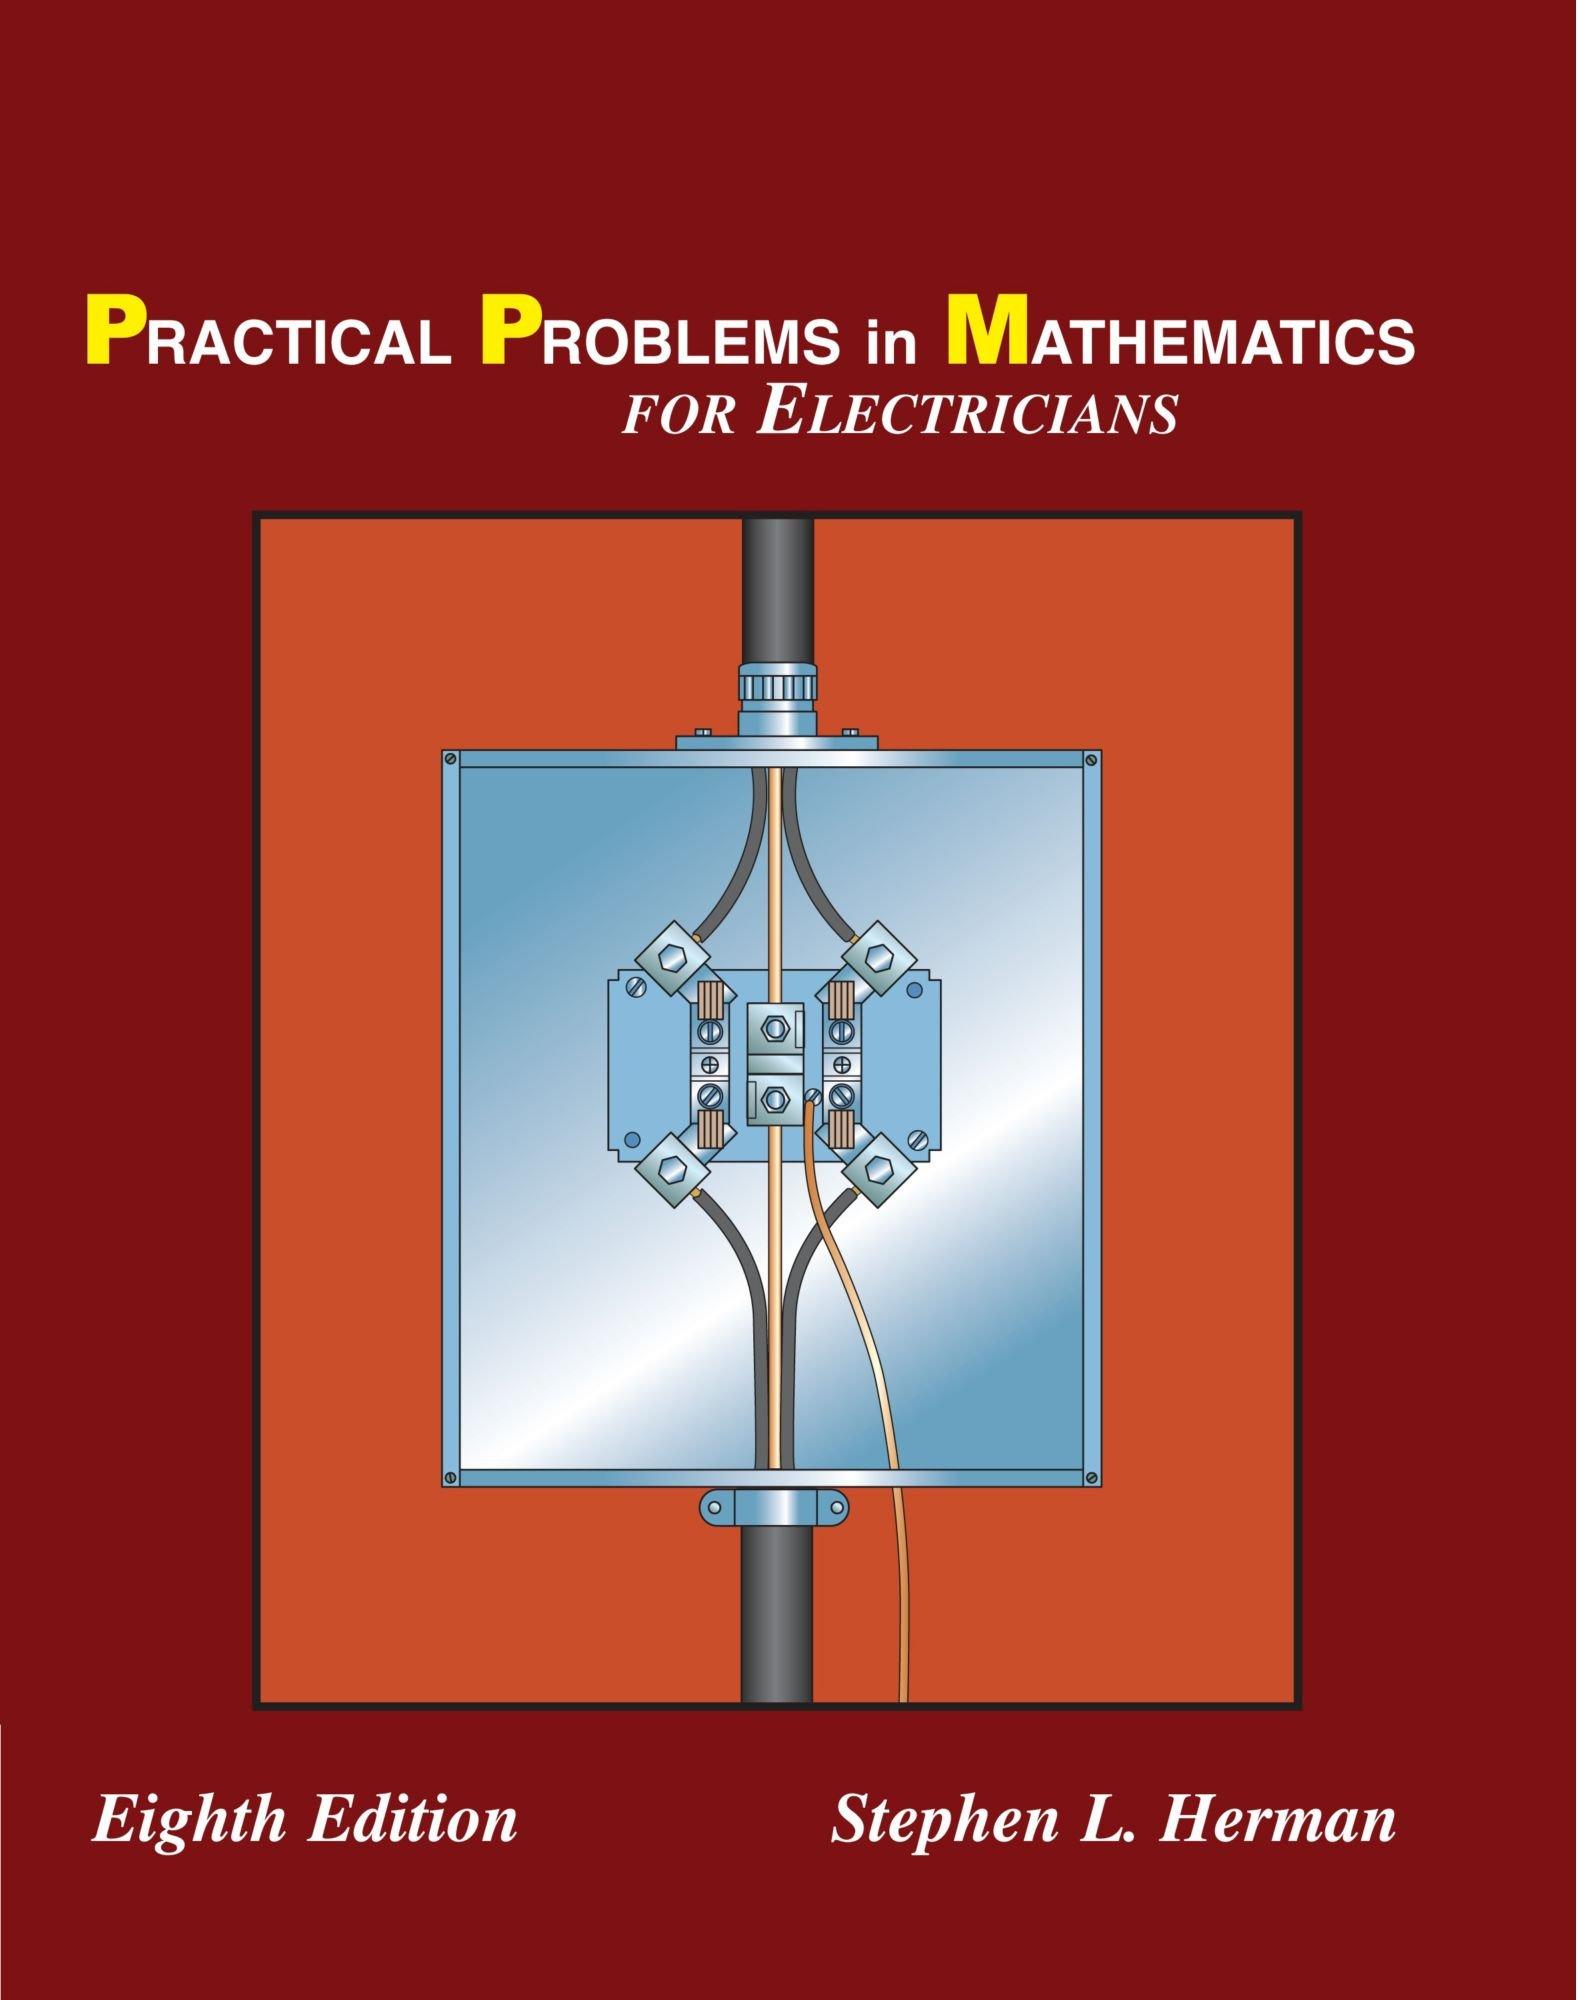 practical problems in mathematics for electricians 8th edition stephen l. herman 1428324011, 9781428324015